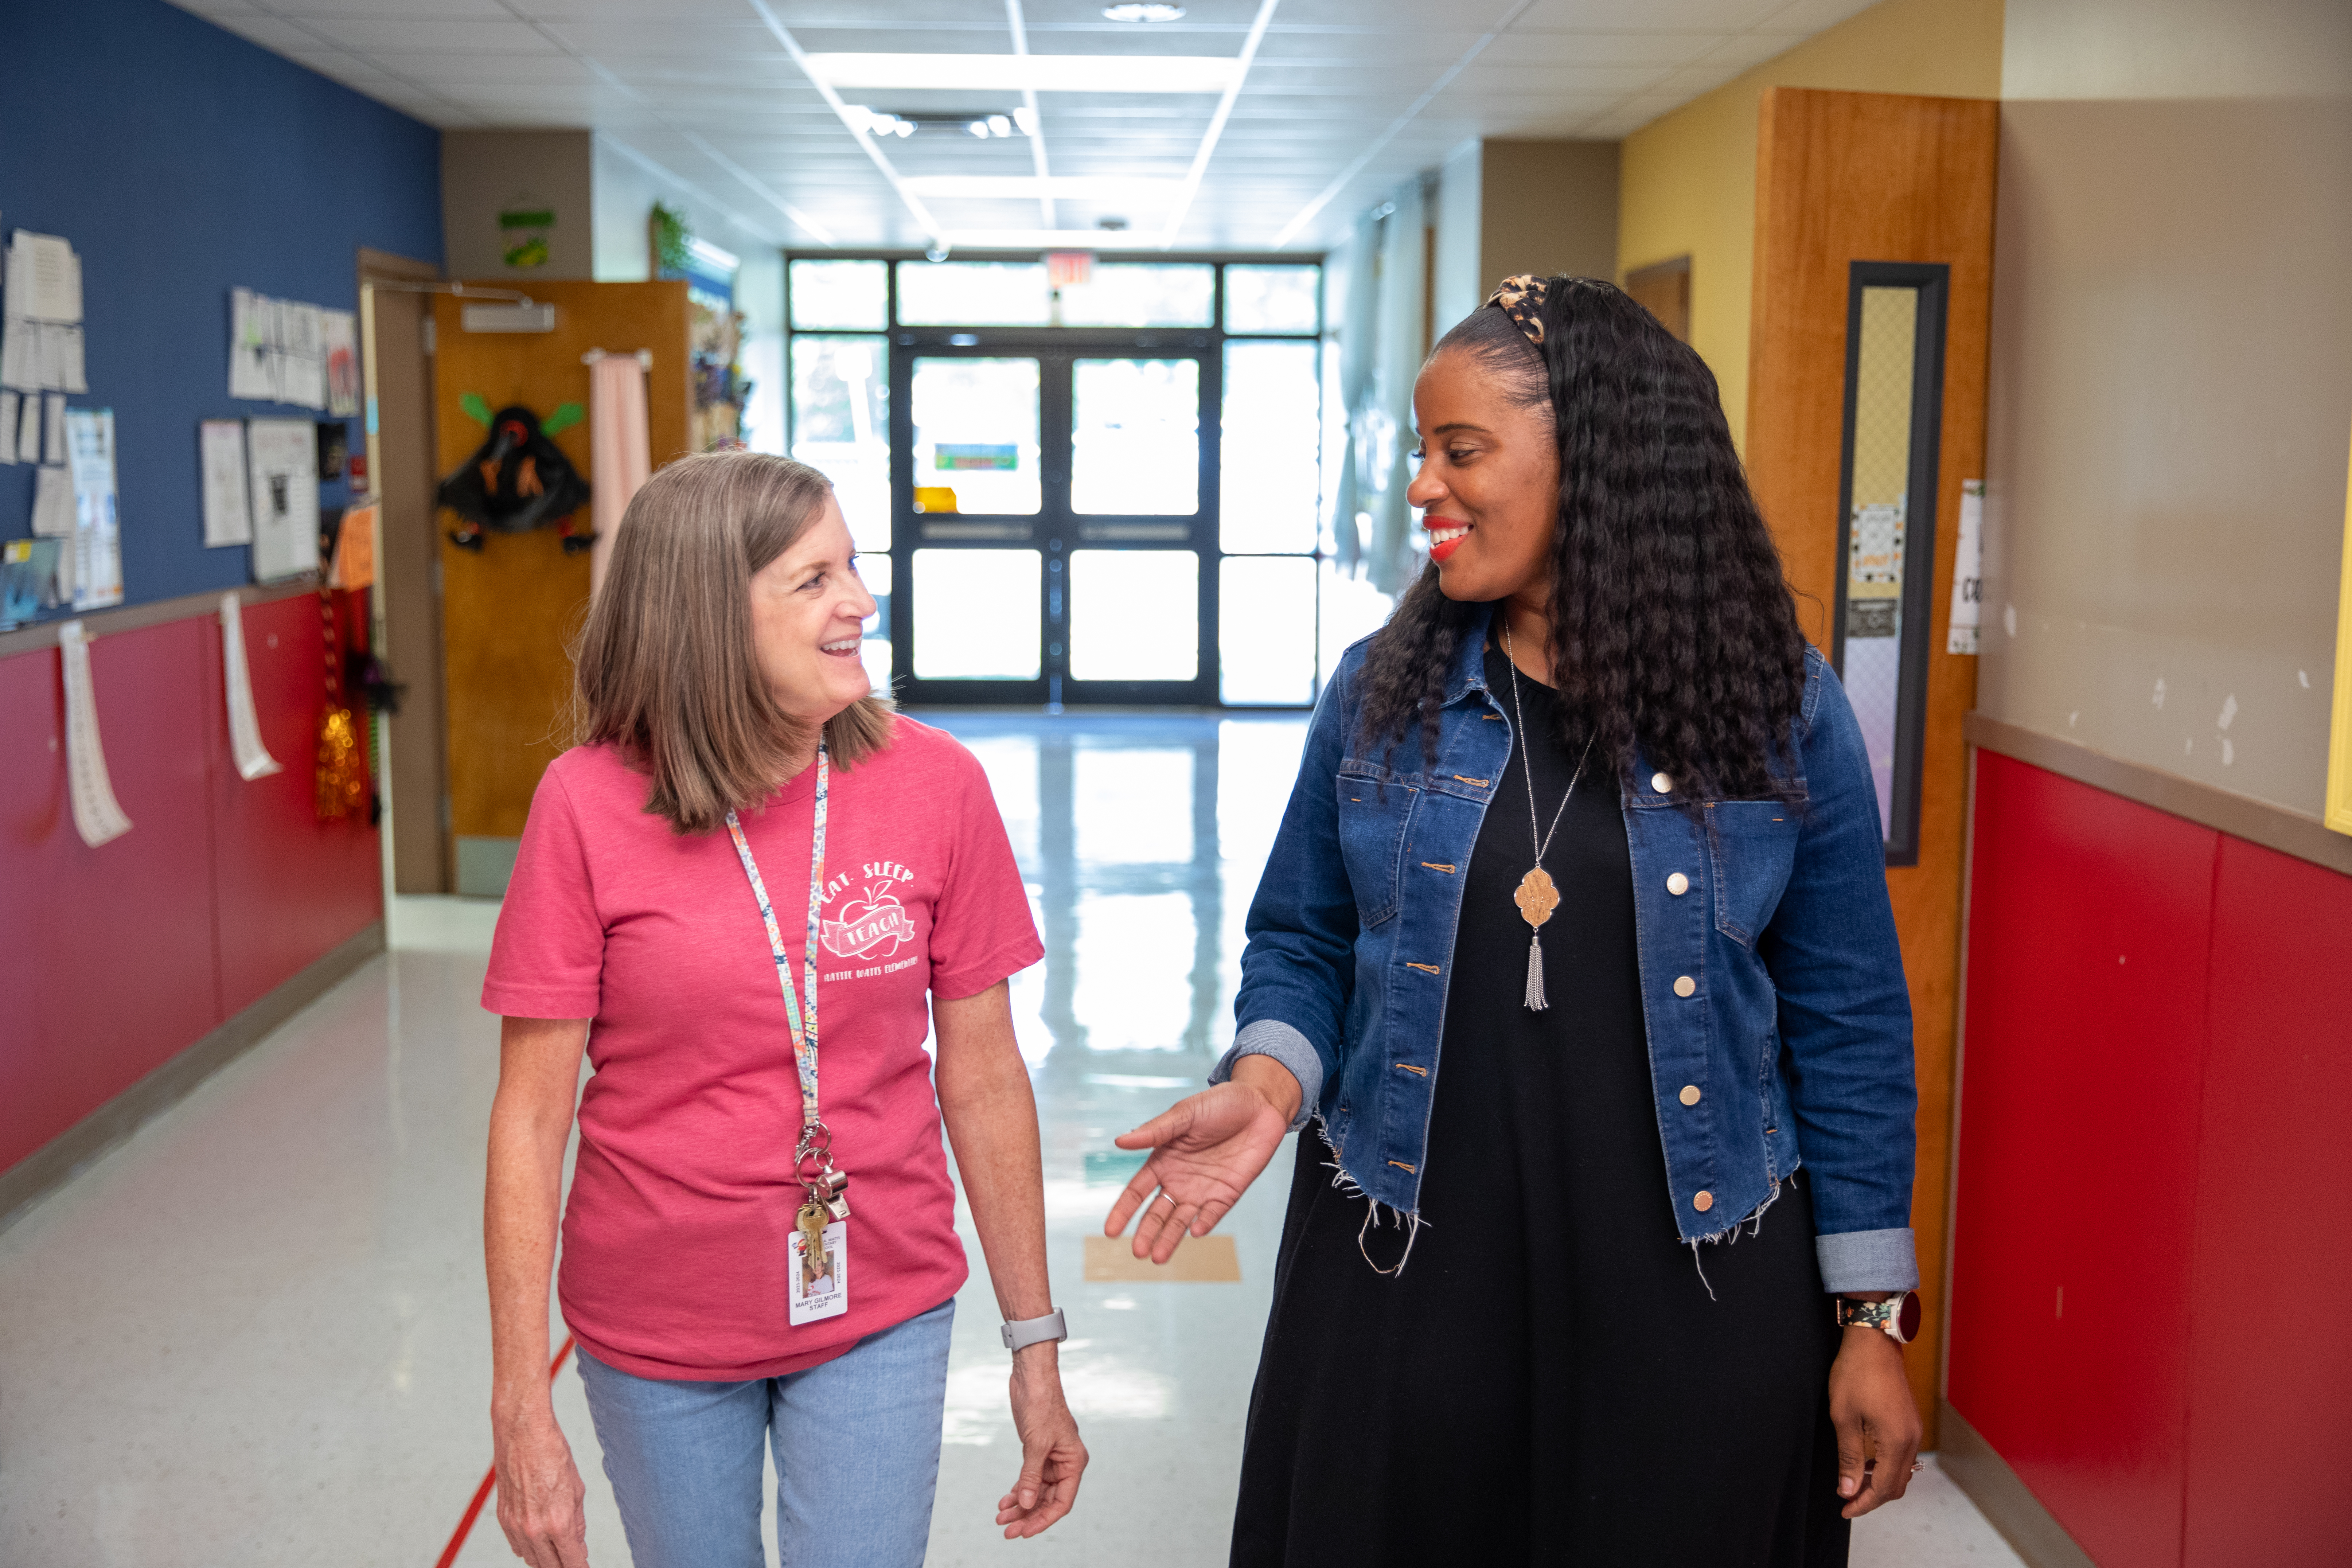 Rekeisha Treig walks with a colleague down the hall of her St. Mary Parish elementary school.